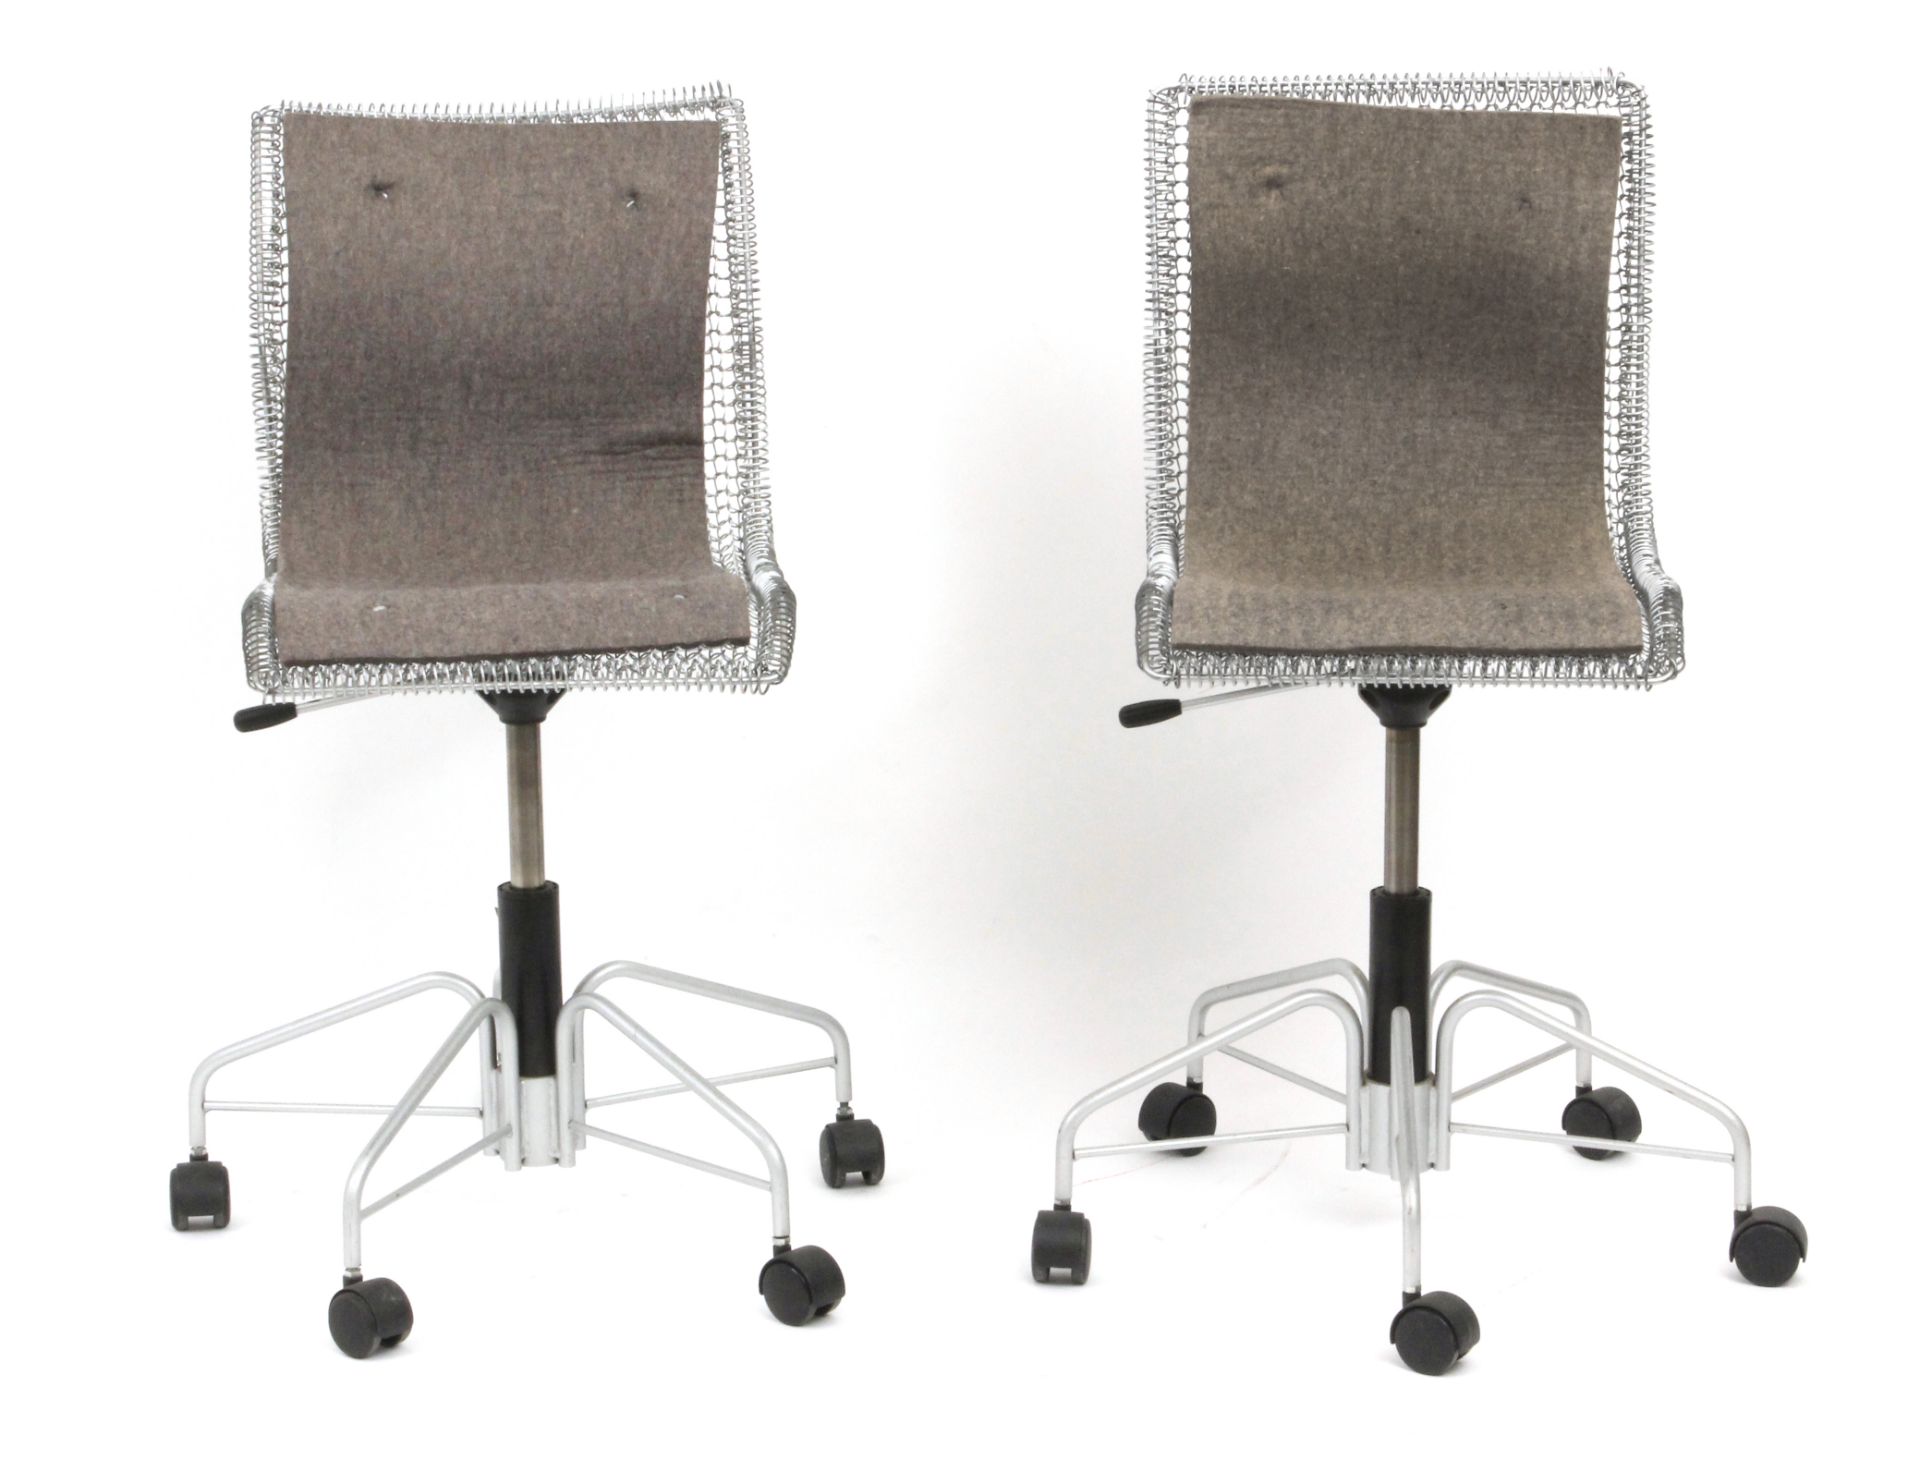 Niall O'Flynn for Spectrum circa 1997. A pair of Rascal chairs - Image 2 of 3